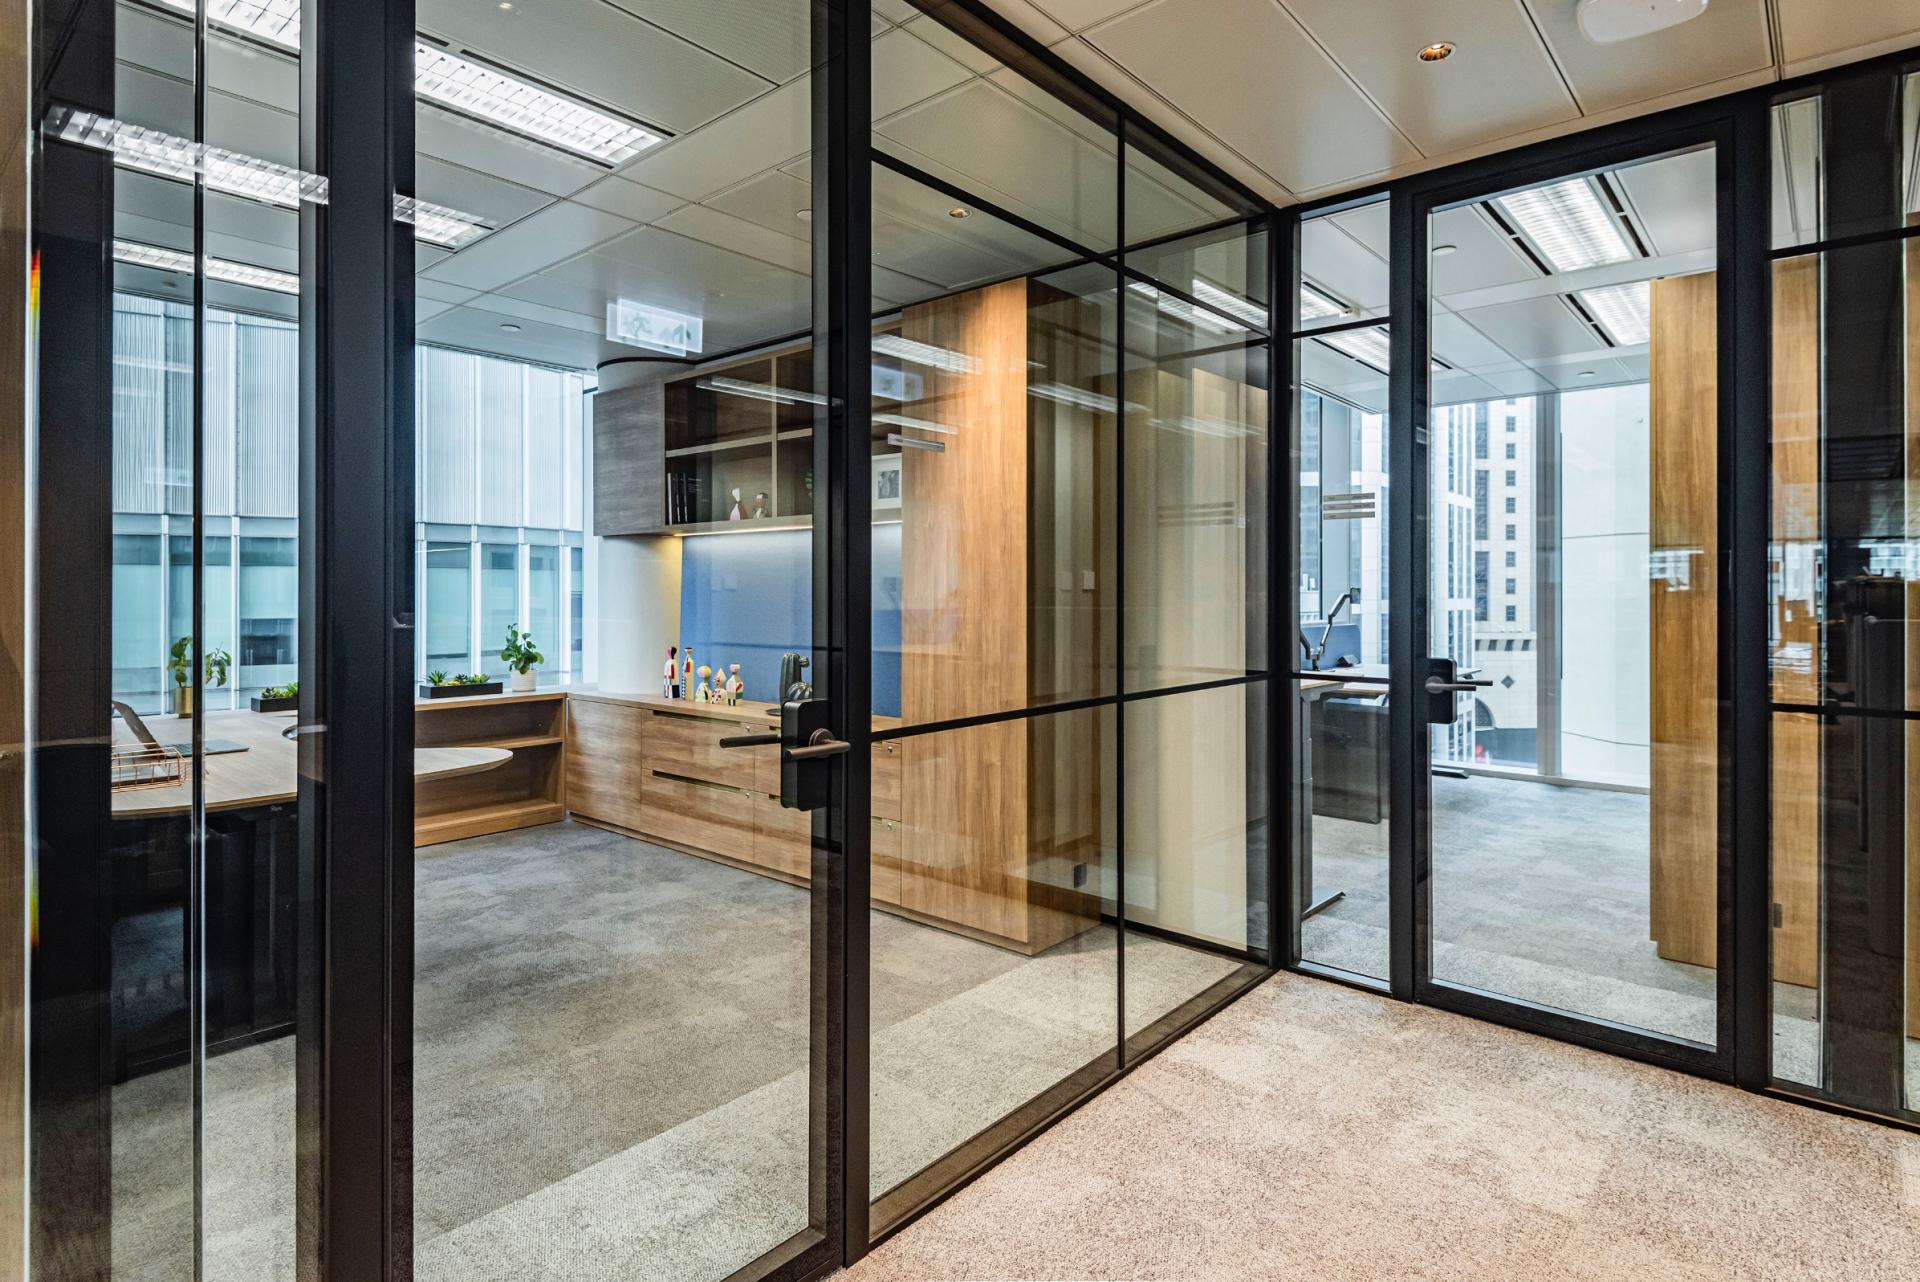 White & Case Law Firm's Central office creates a warm and welcoming workplace